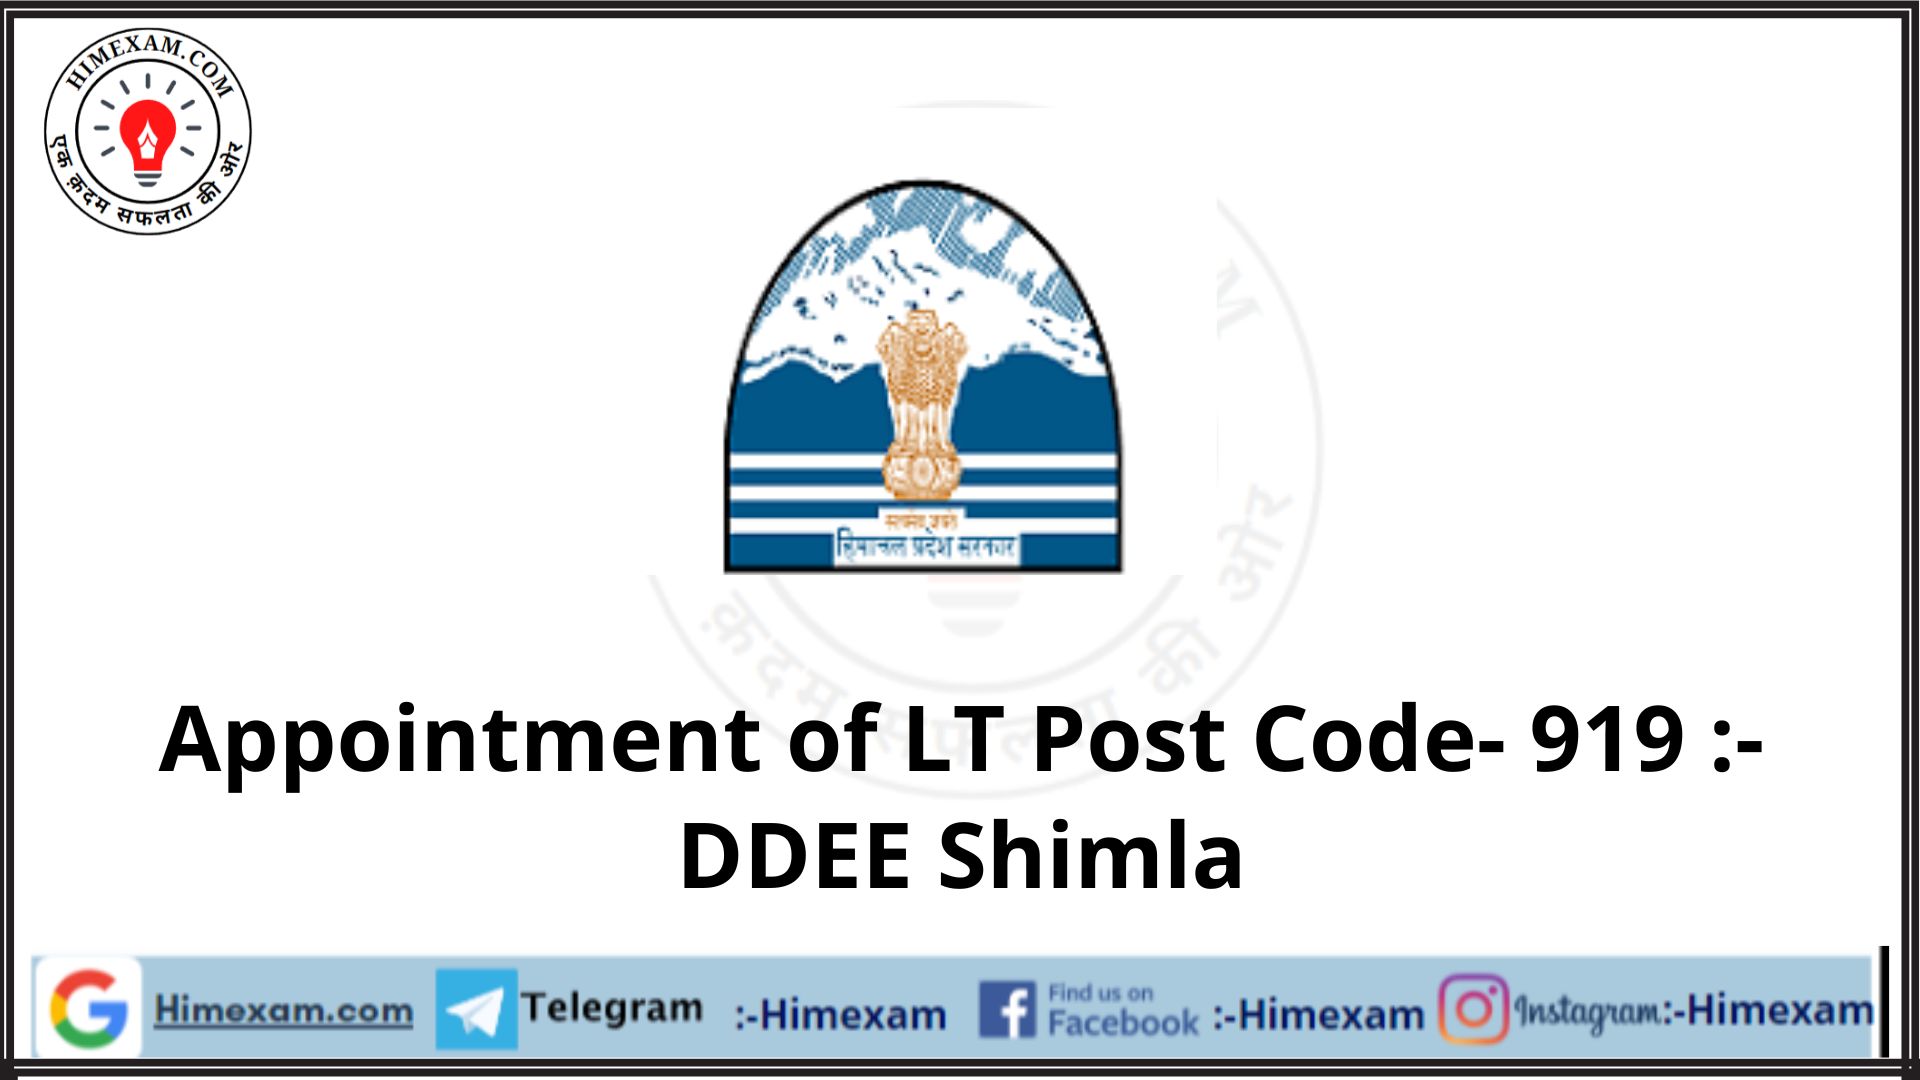 Appointment of LT Post Code- 919 :-DDEE Shimla